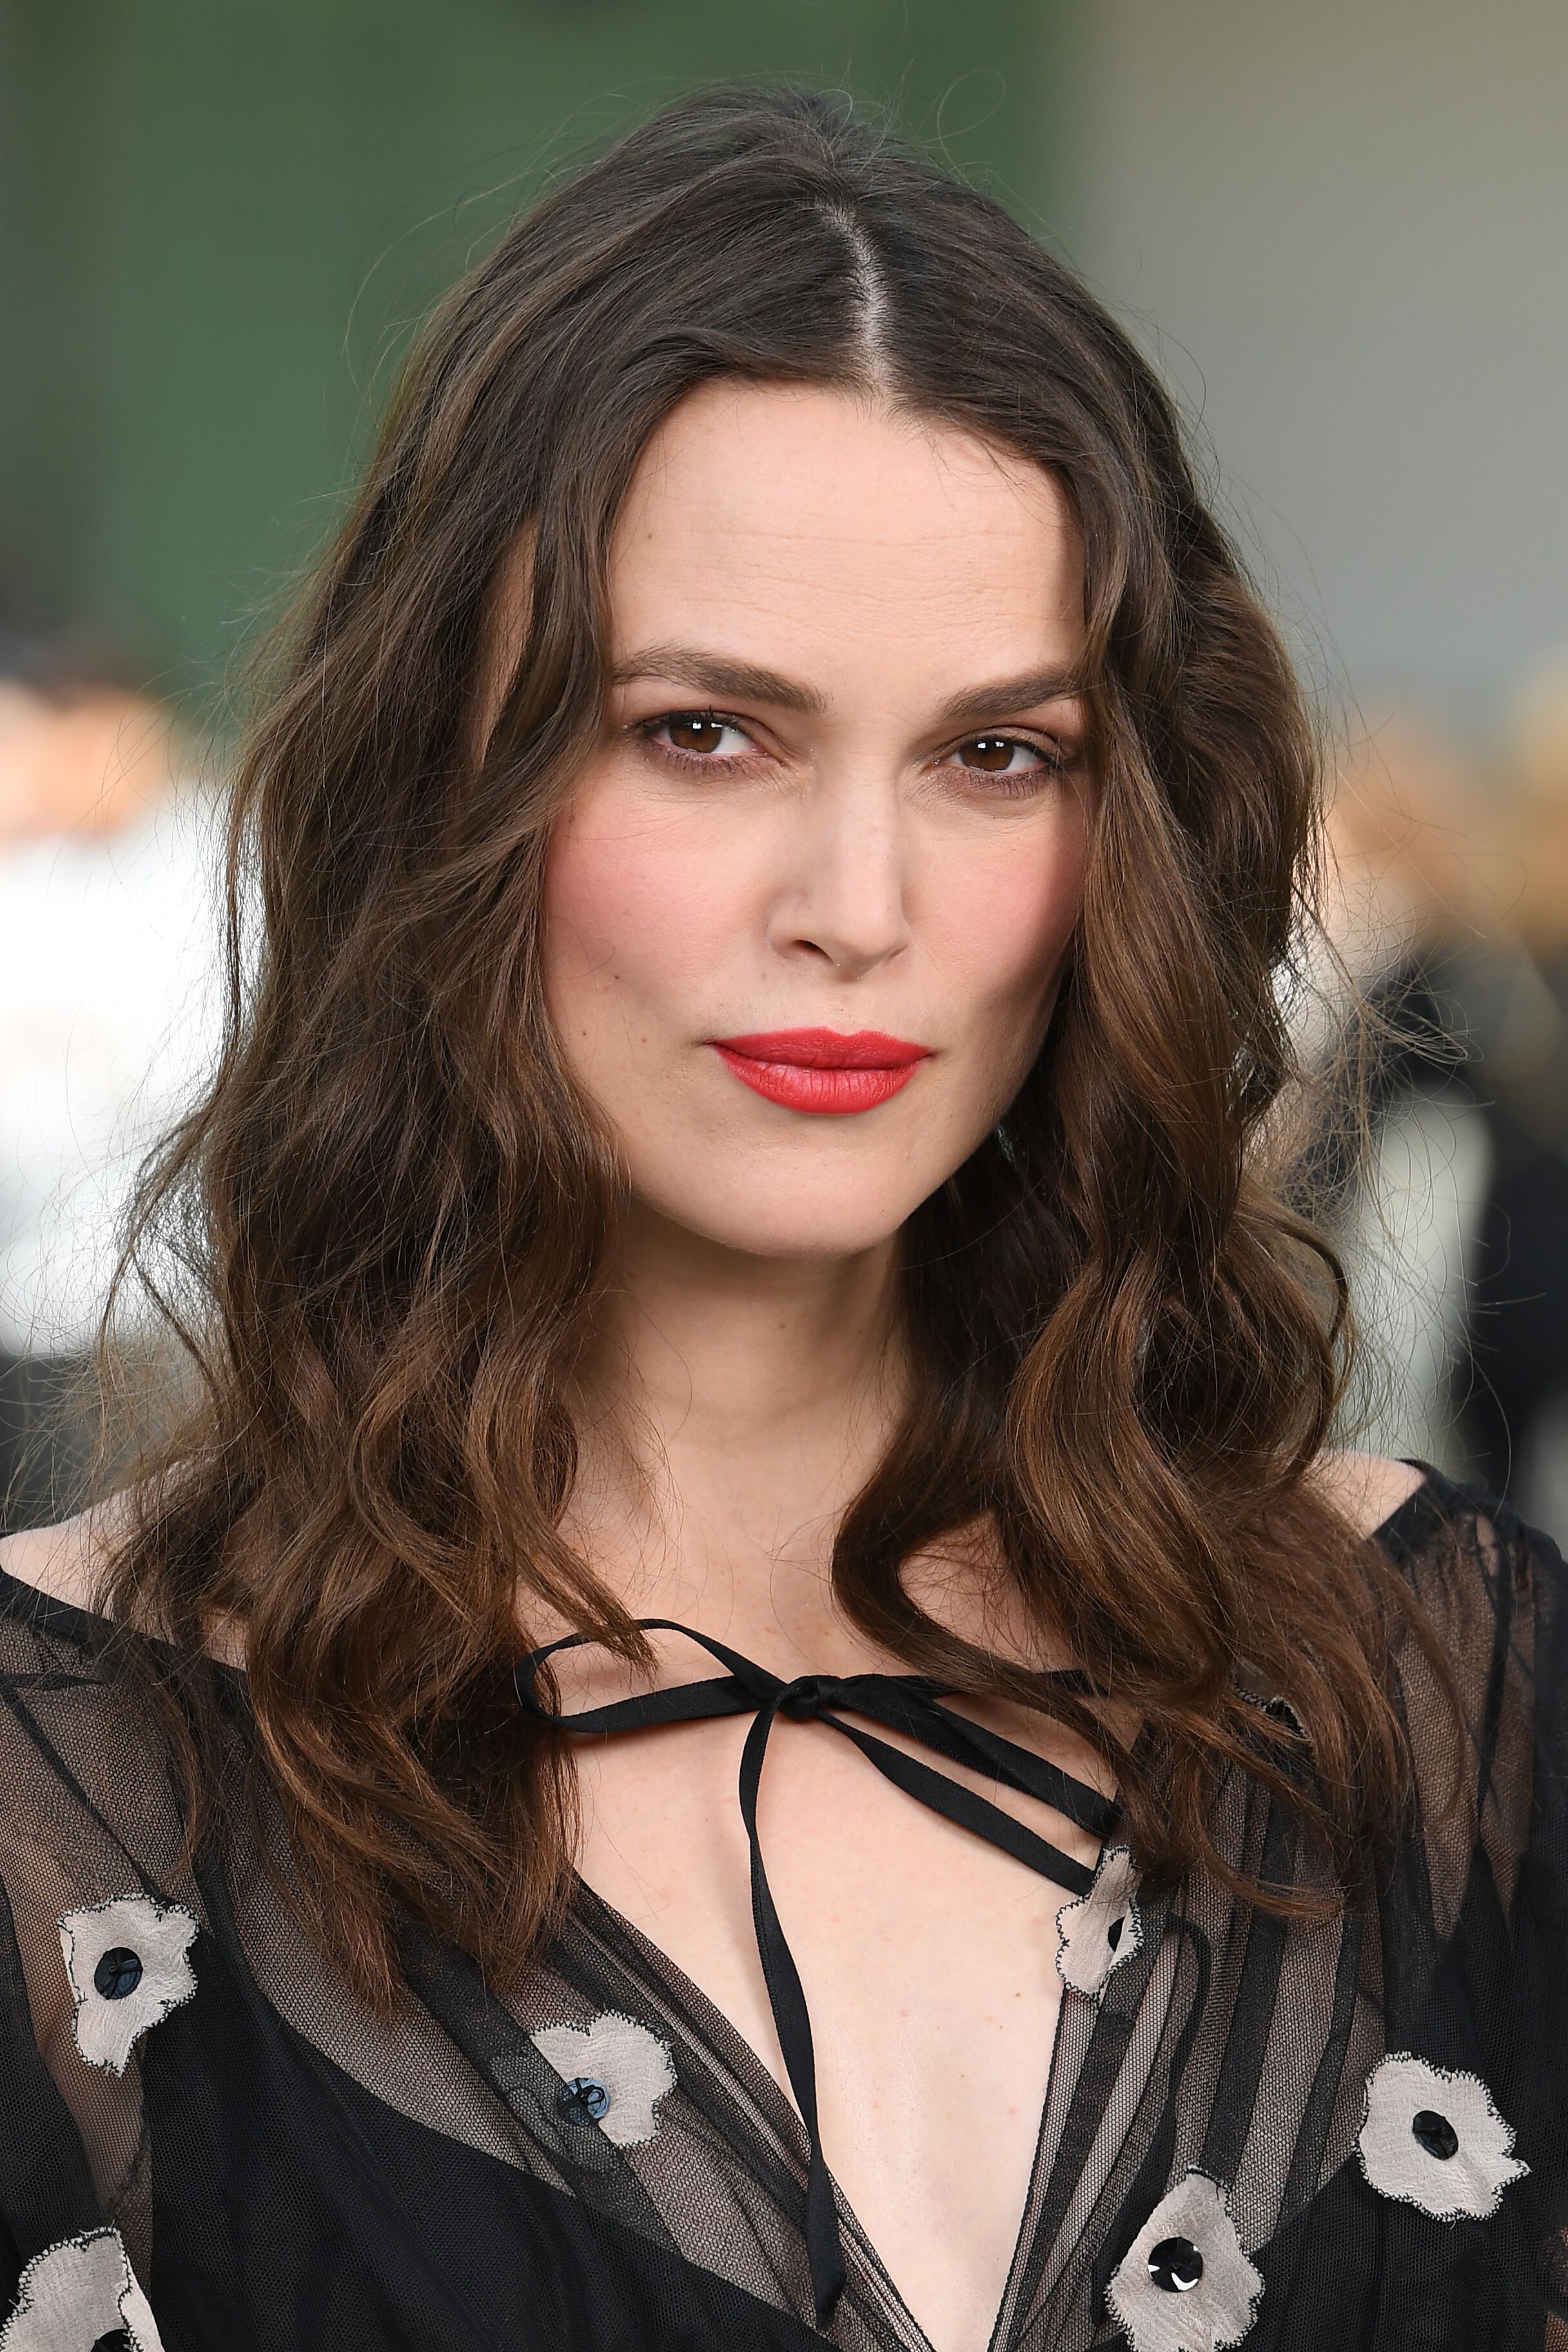 Keira Knightley attends the Chanel Cruise 2020. | Source: Getty Images